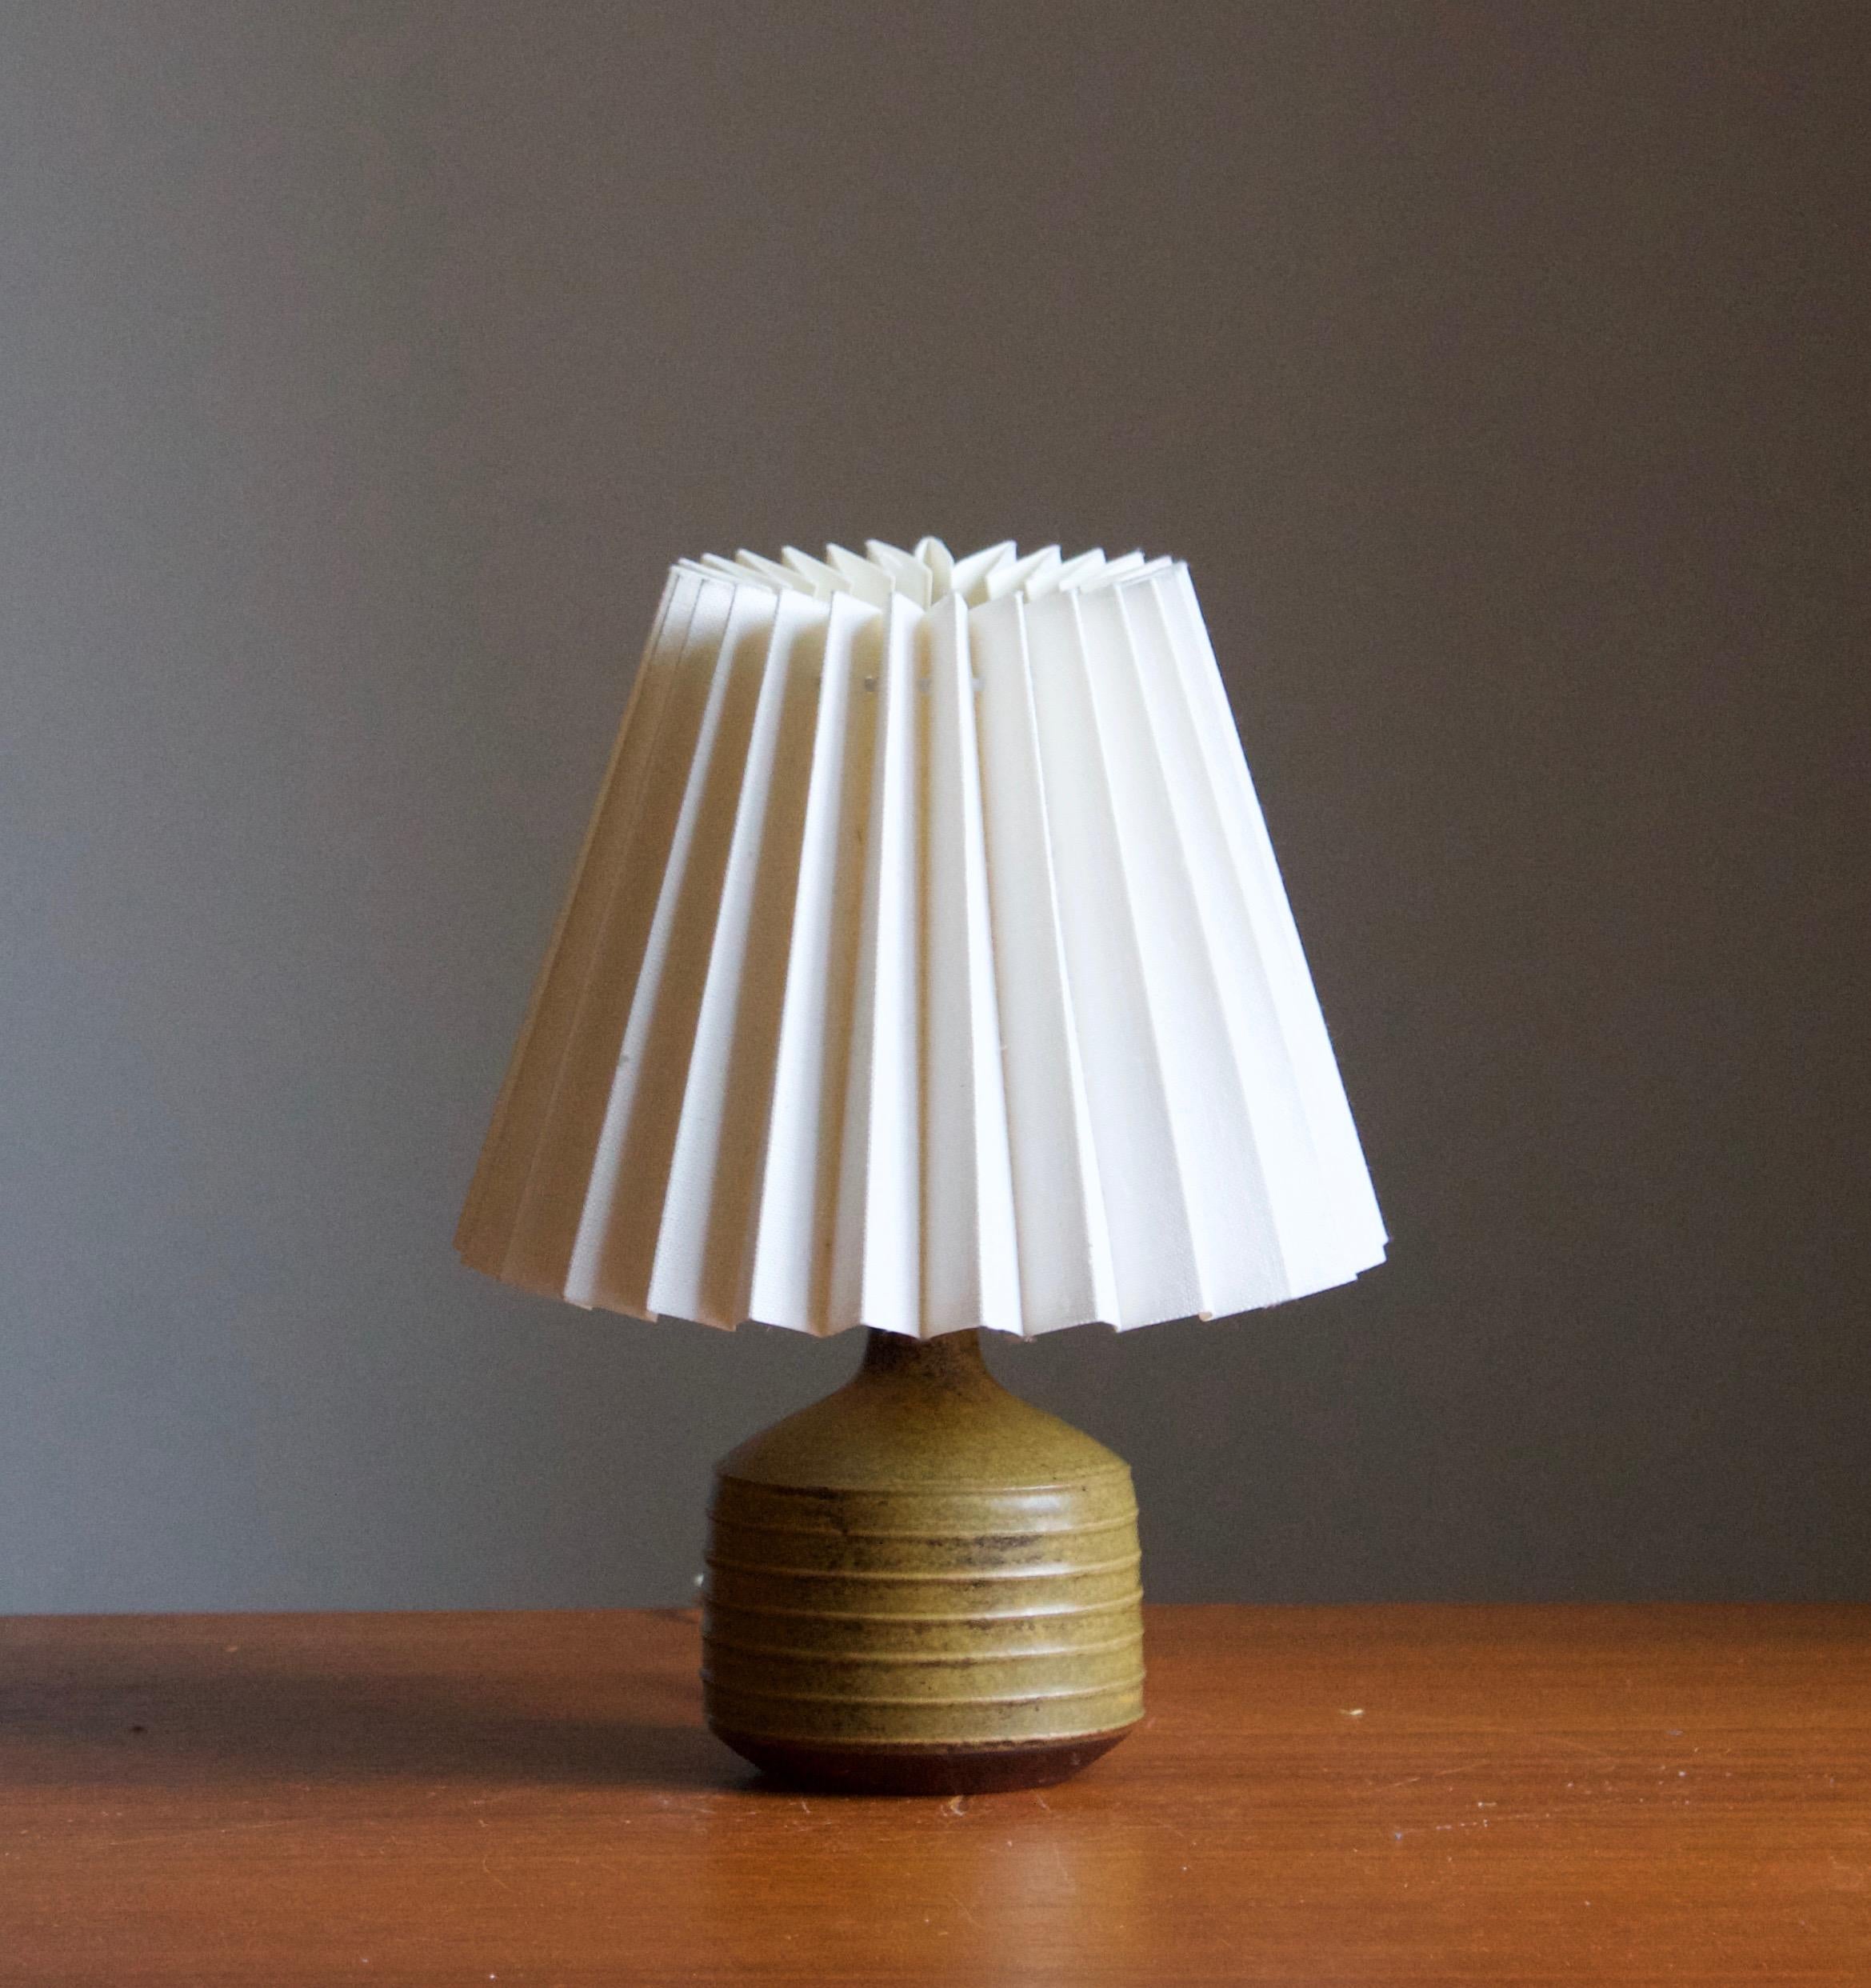 A small table lamp. Produced and designed by Rolf Palm, Sweden.

In glazed stoneware. Stated dimensions exclude lampshade. Height includes socket. Sold without lampshade.